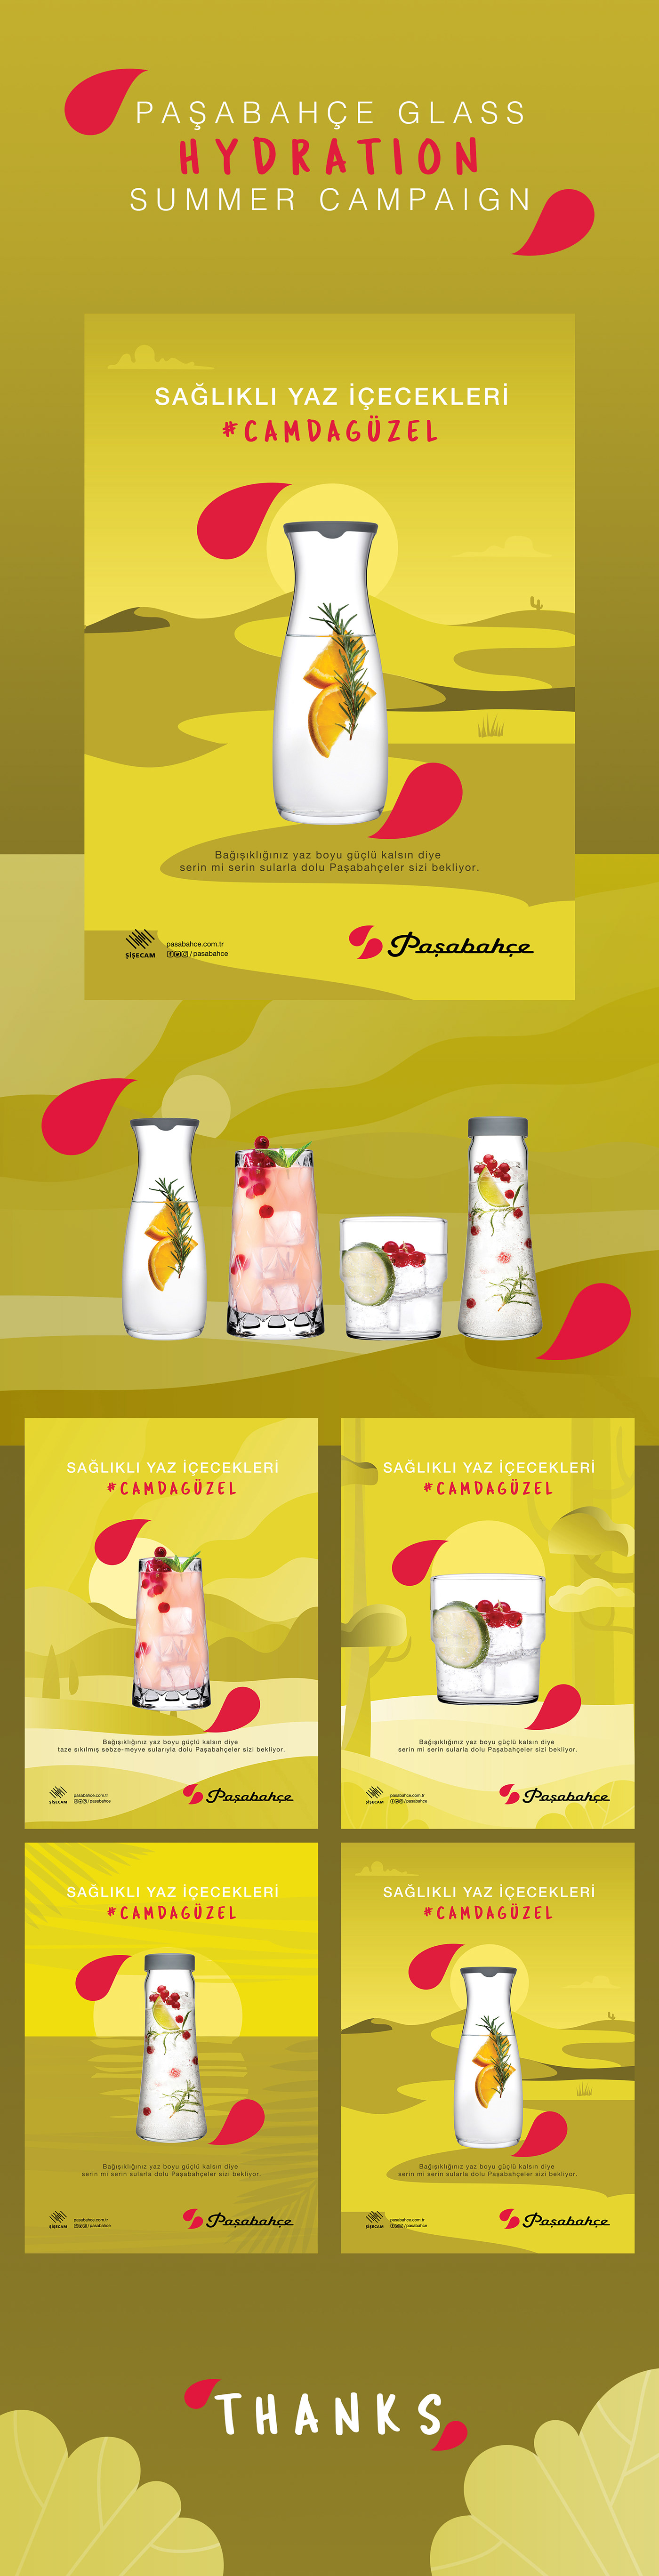 campaign drink water  glassware Hydrate Keyvisual pasabahce Retail summer thirst